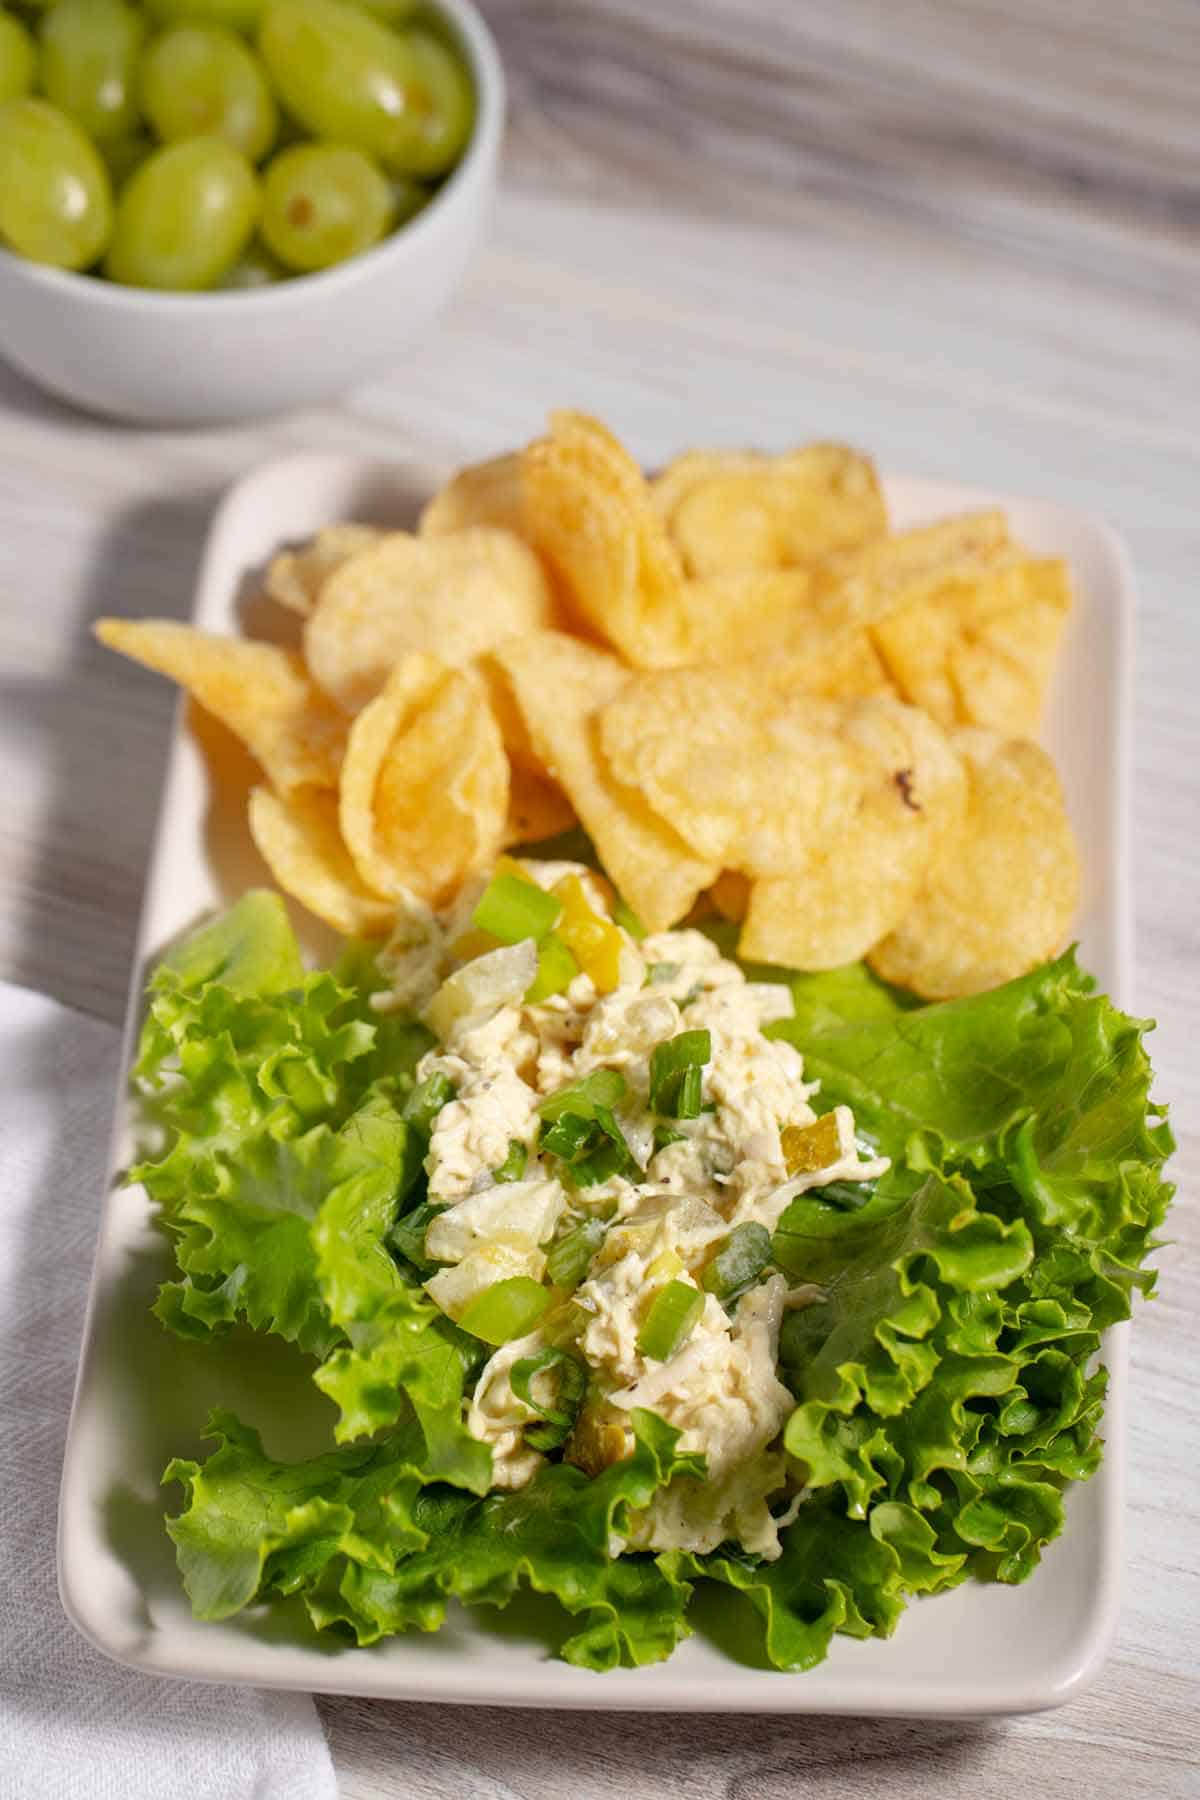 Chicken salad on a bed of greens with a side of chips and grapes.